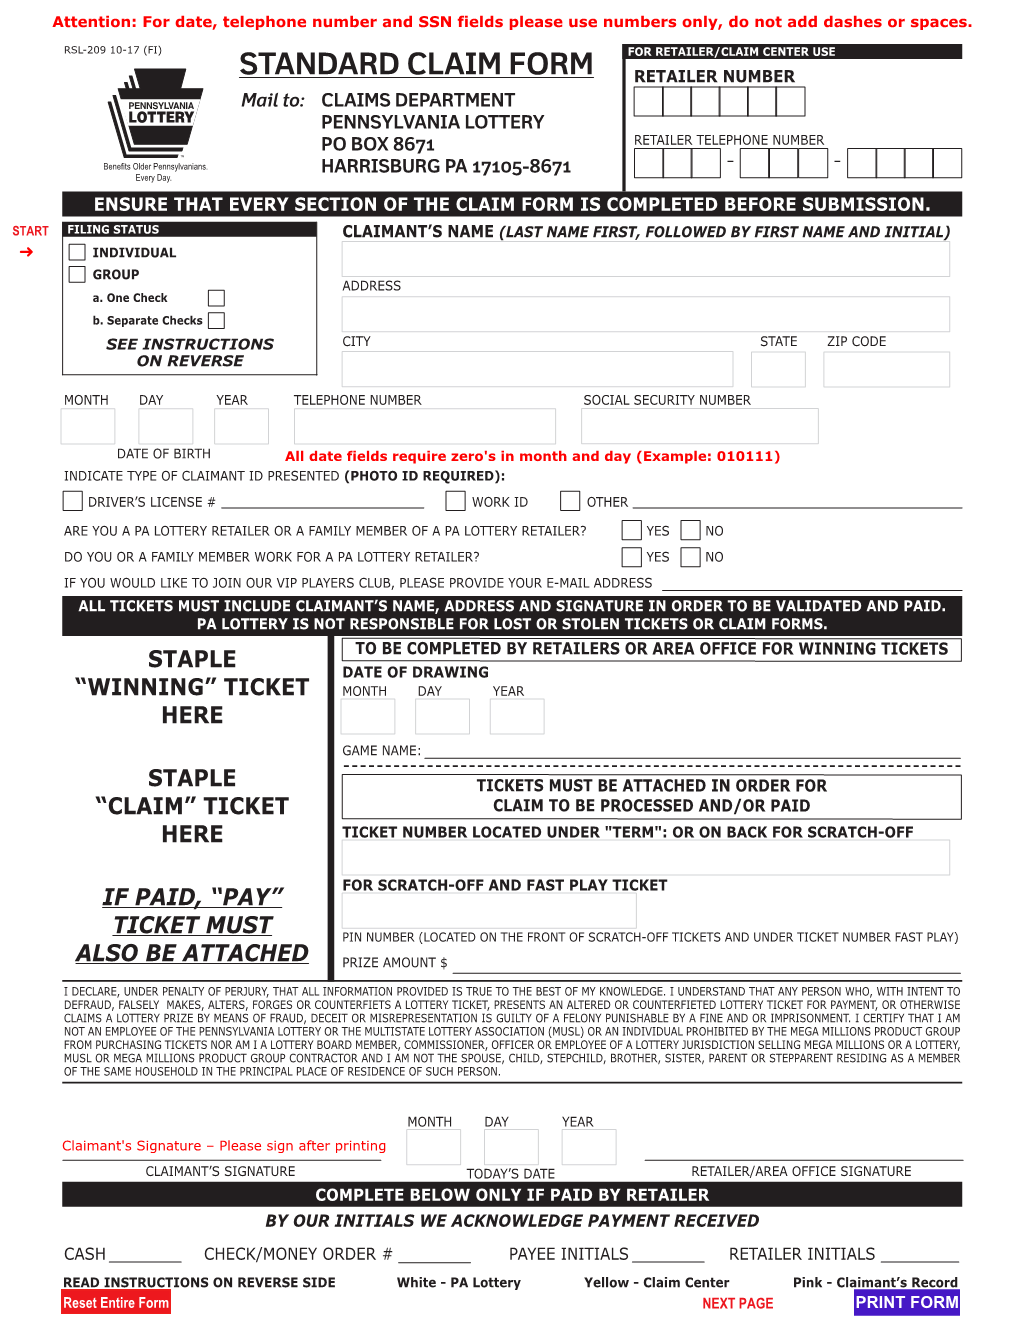 STANDARD CLAIM FORM RETAILER NUMBER Mail To: CLAIMS DEPARTMENT PENNSYLVANIA LOTTERY PO BOX 8671 RETAILER TELEPHONE NUMBER HARRISBURG PA 17105-8671 – –